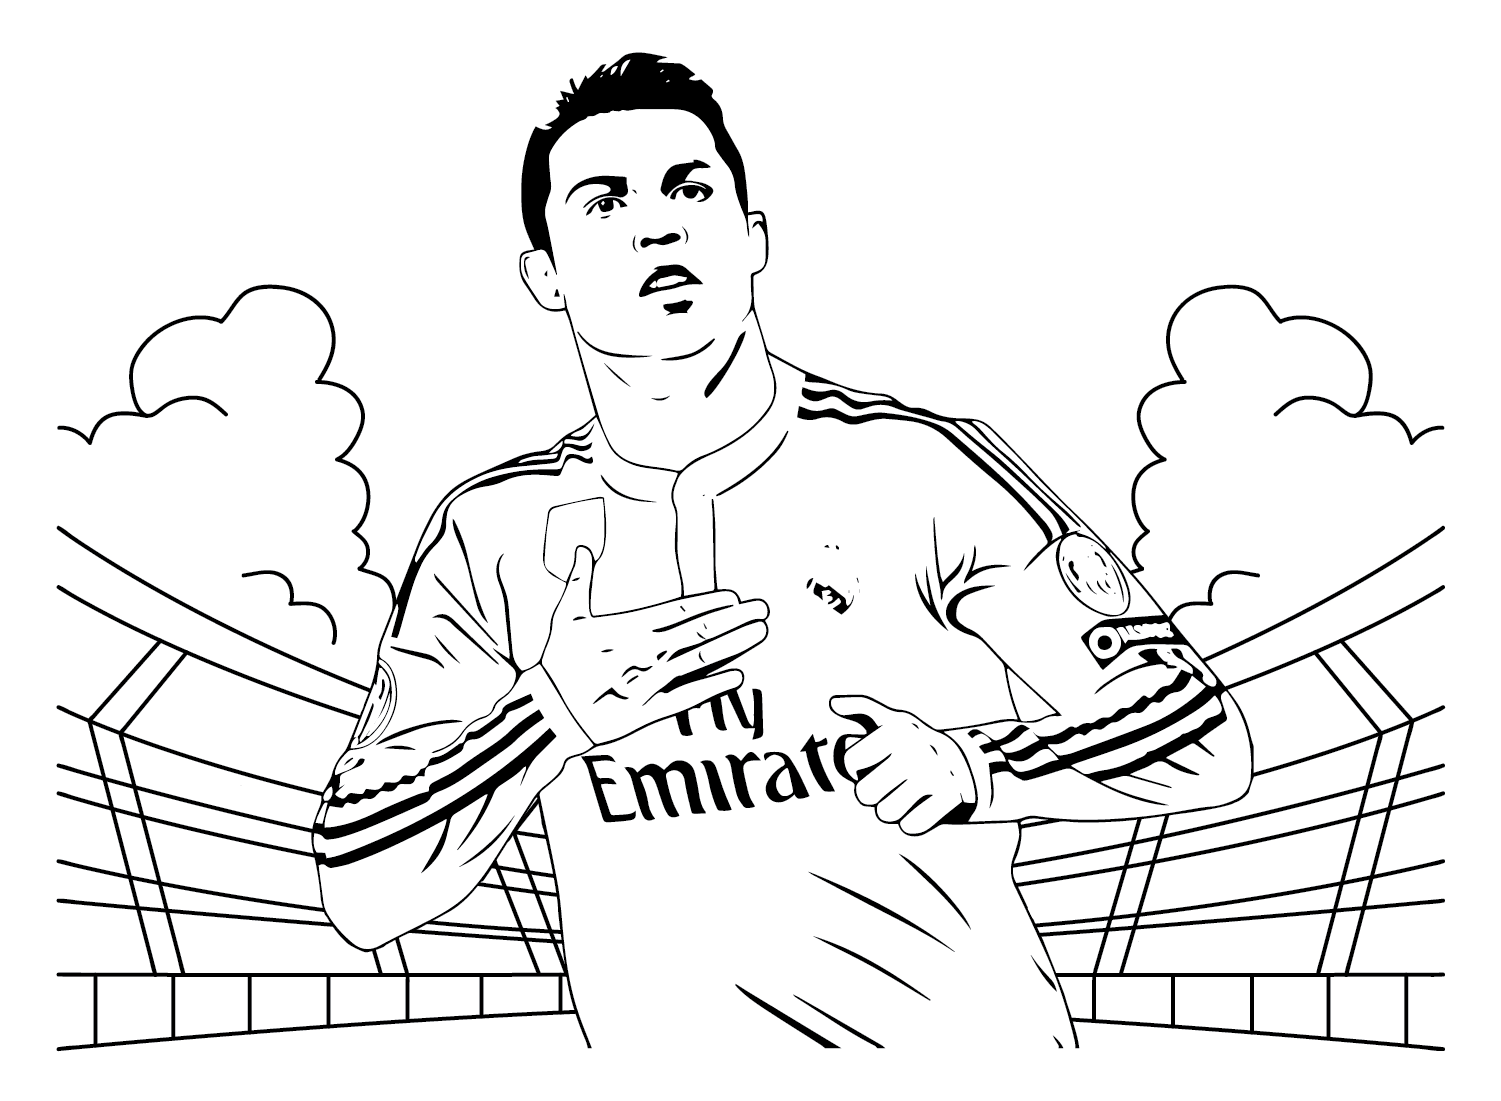 Cristiano ronaldo coloring pages